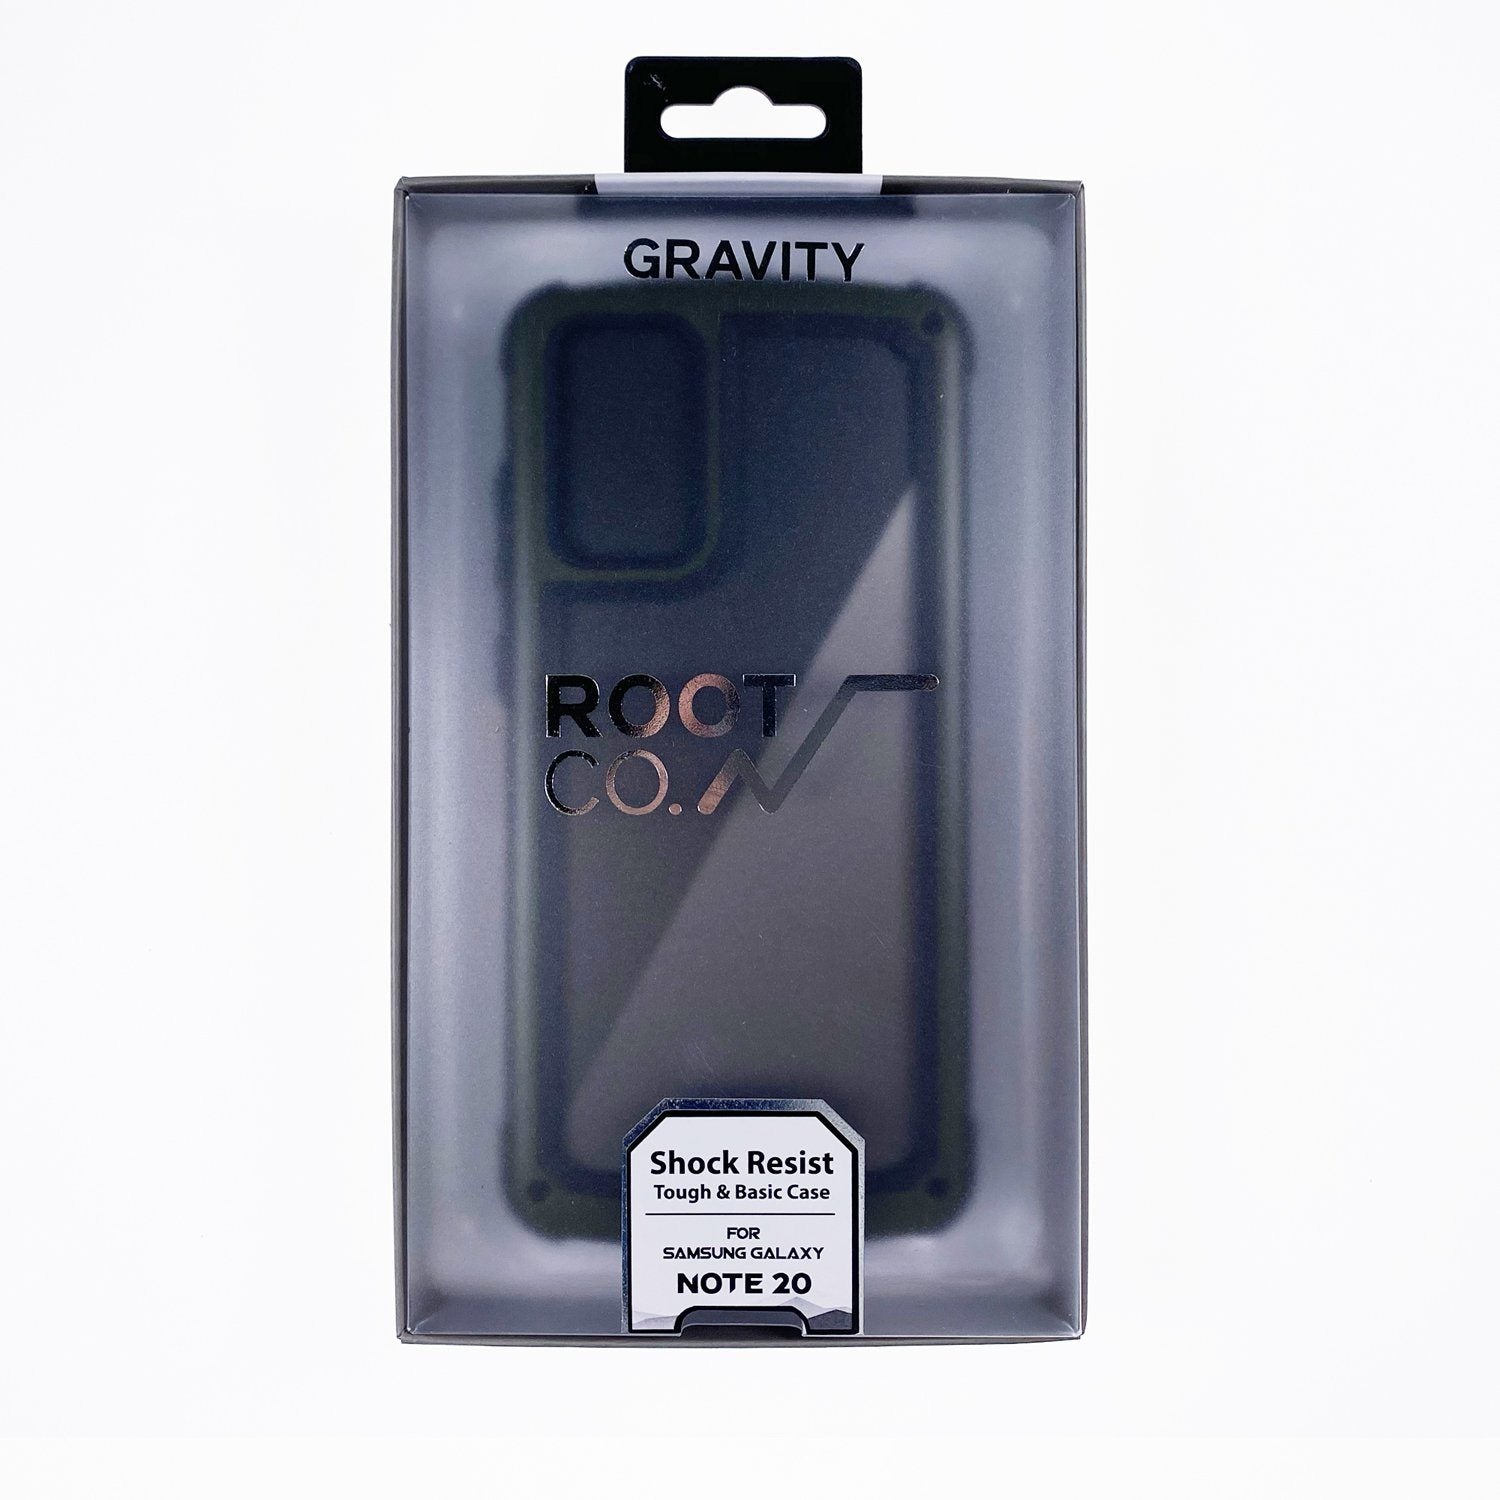 Root Co. Gravity Shock Resist Tough & Basic Case for Samsung Galaxy Note 20, Khaki Default ROOT CO. 